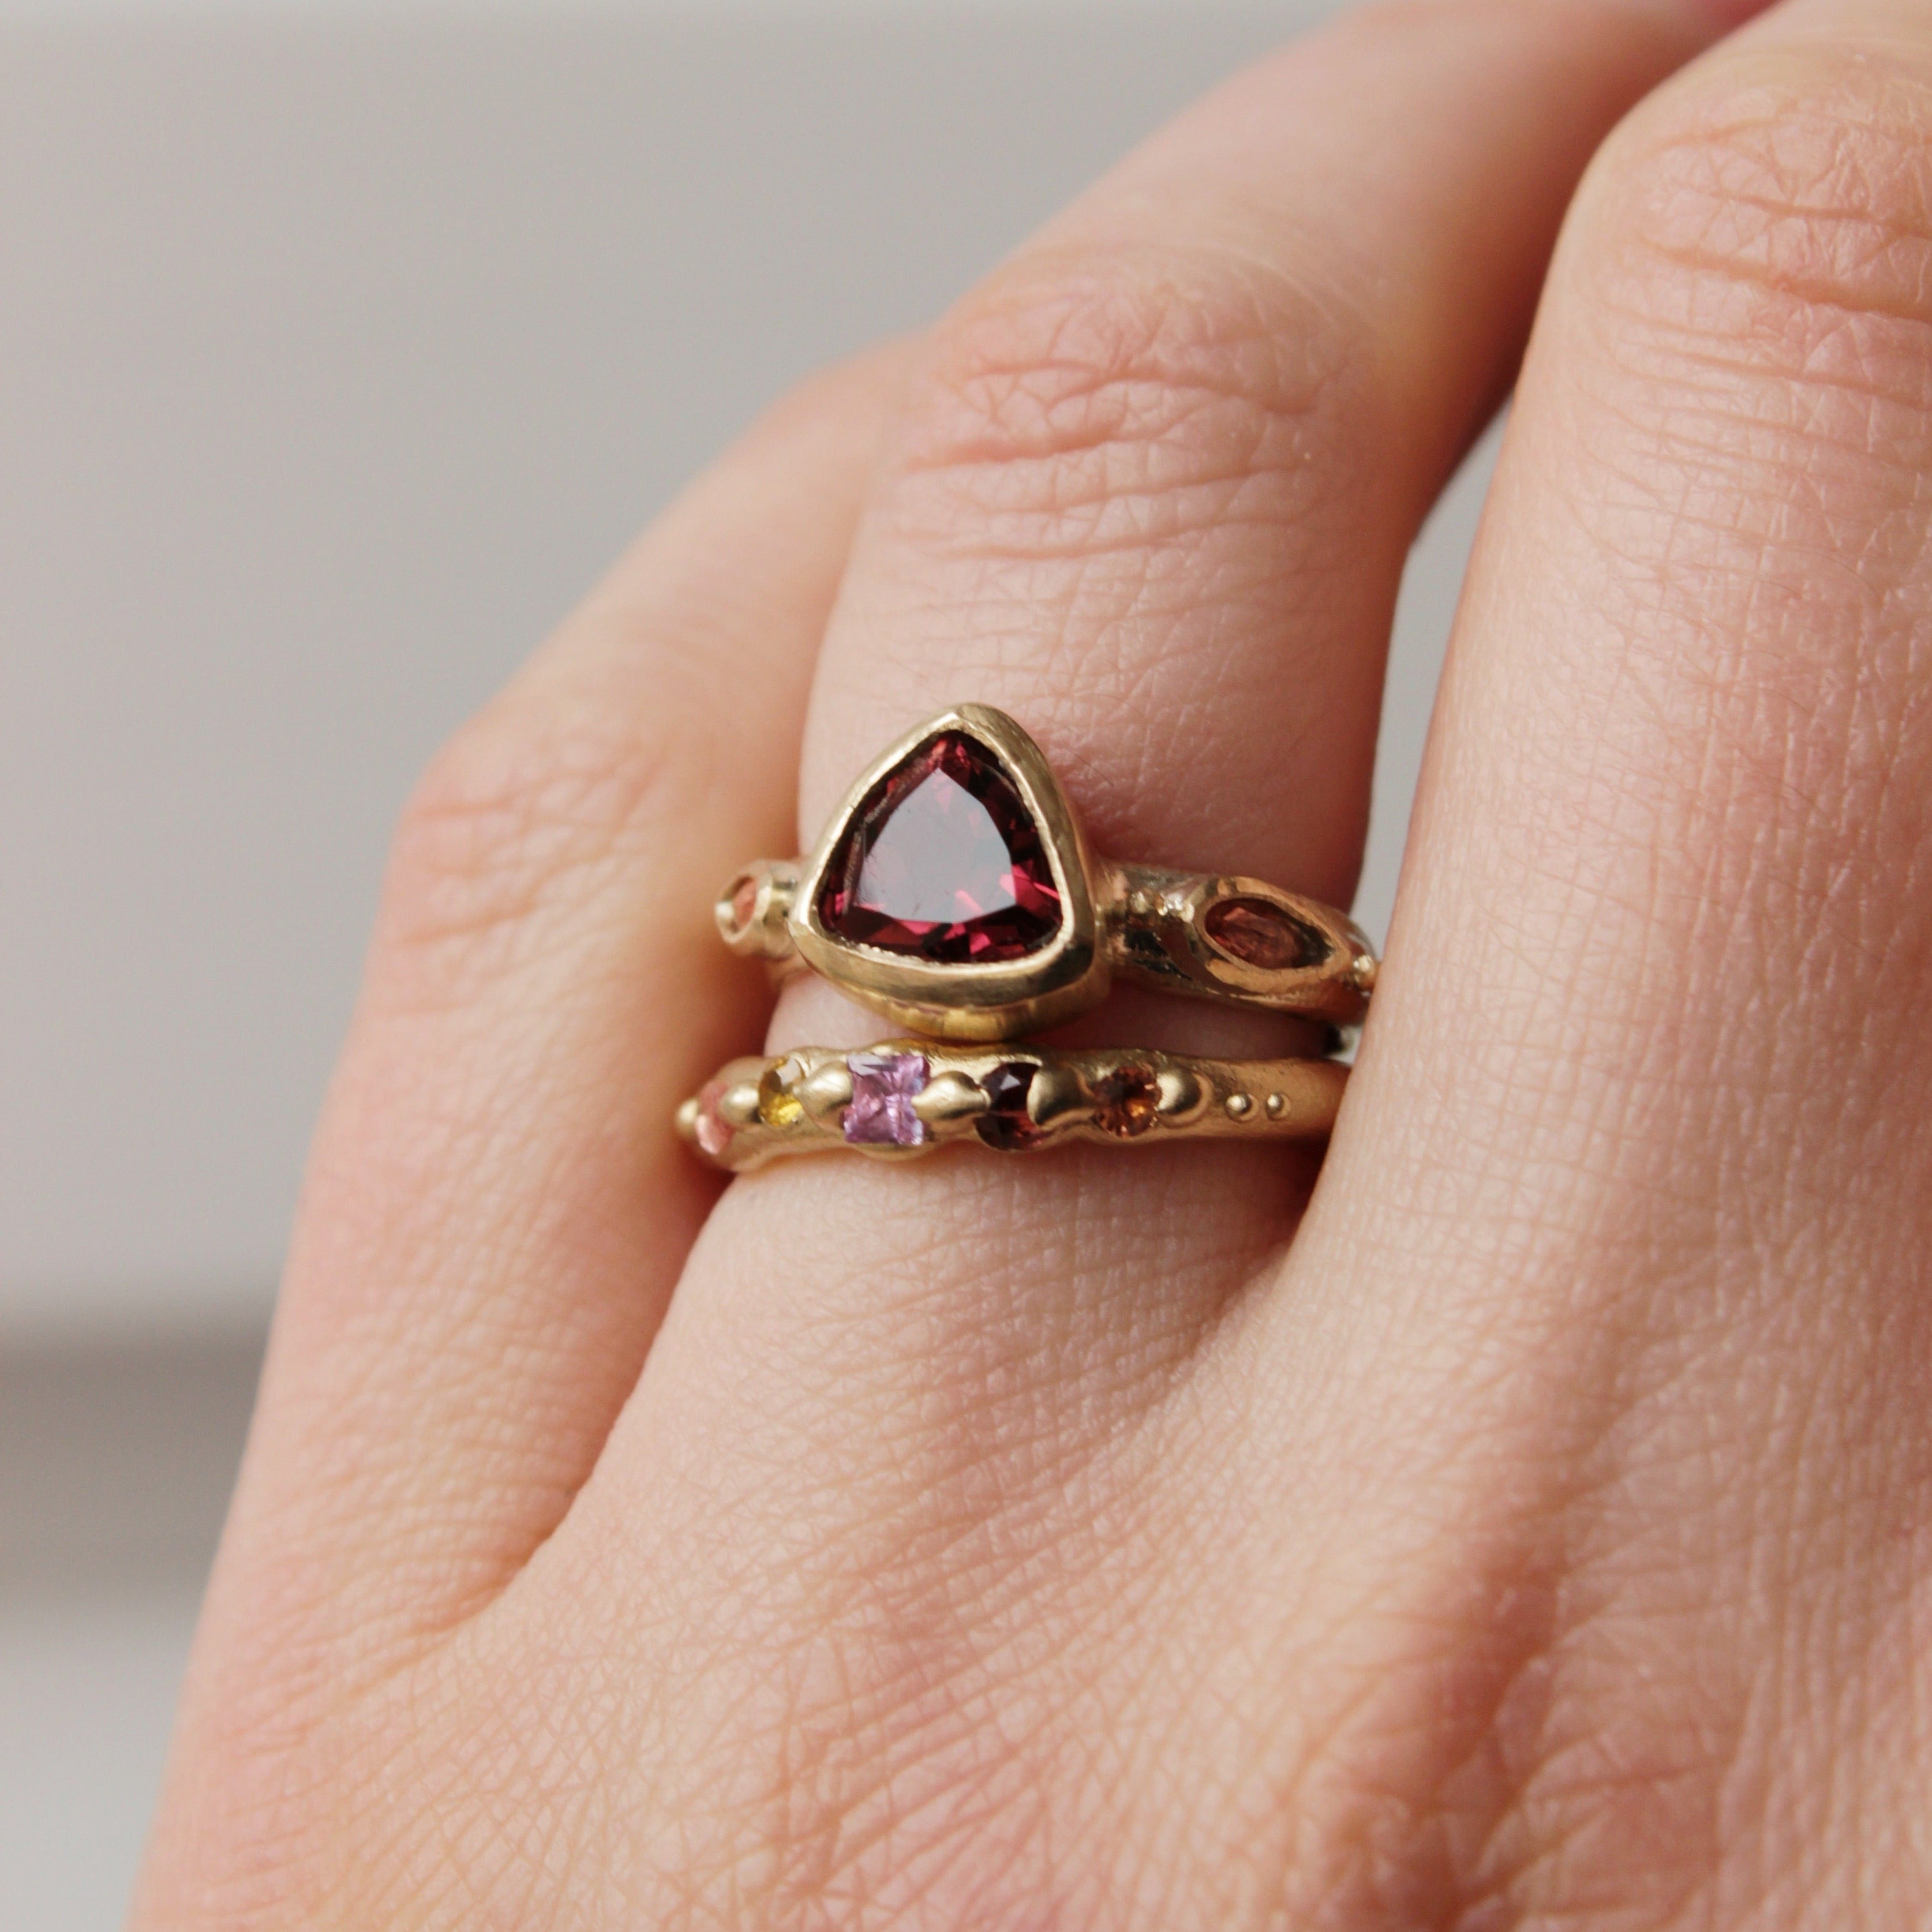 Alternative pink tourmaline engagement ring, handcrafted by Josie Mitchell jewellery in Frome, Somerset. Featuring a stunning deep pink tourmaline stone with peach coloured sapphires on either side and delicate gold granules. Worn with the Sapphire wedding band